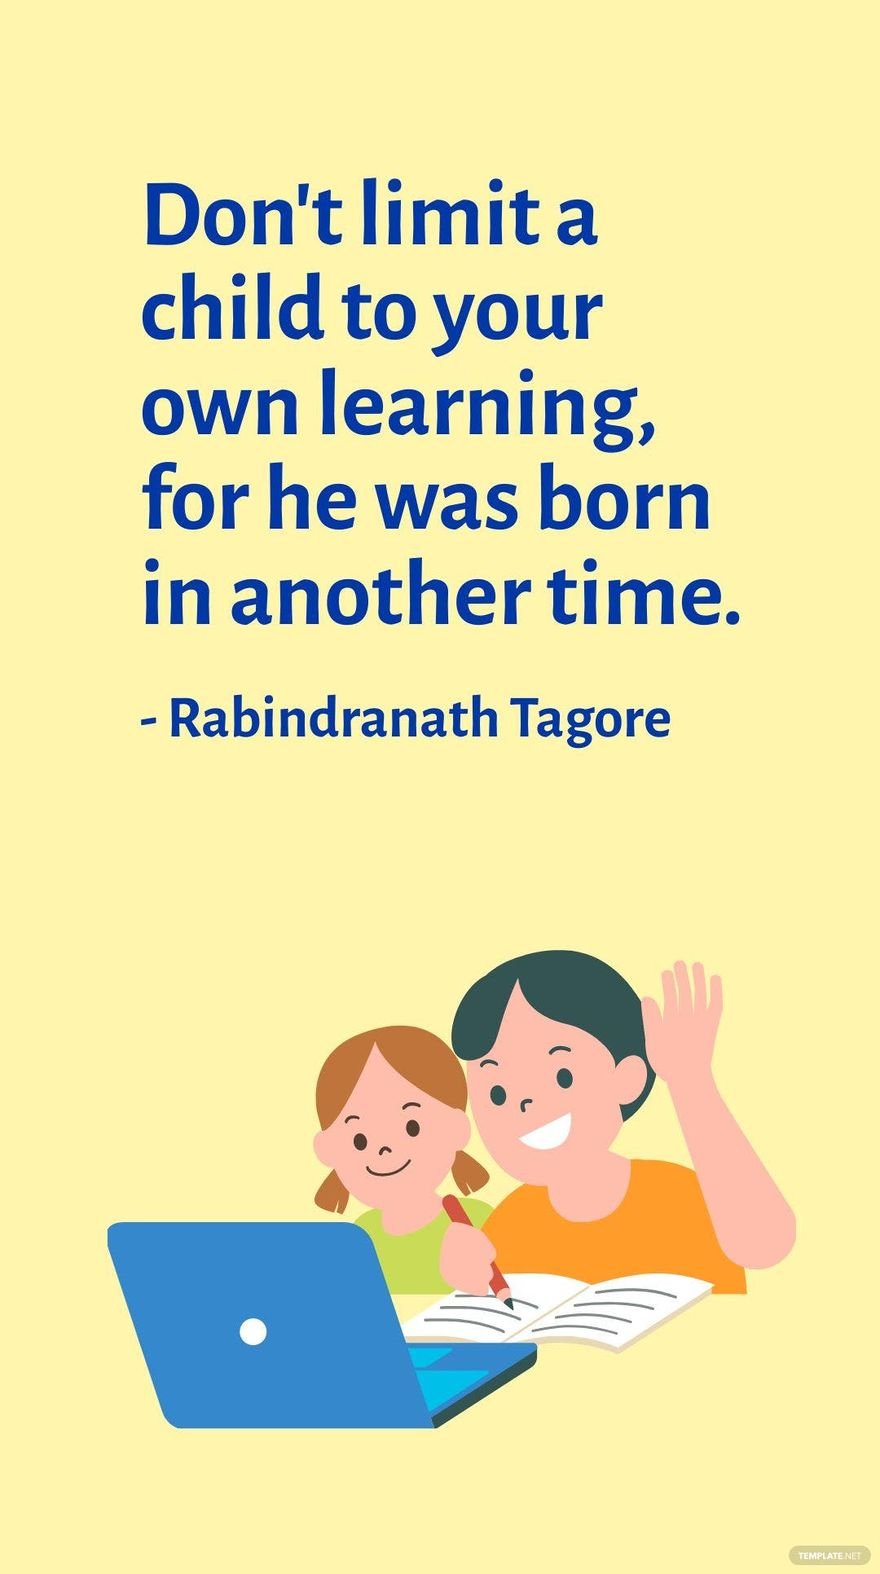 Rabindranath Tagore - Don't limit a child to your own learning, for he was born in another time.